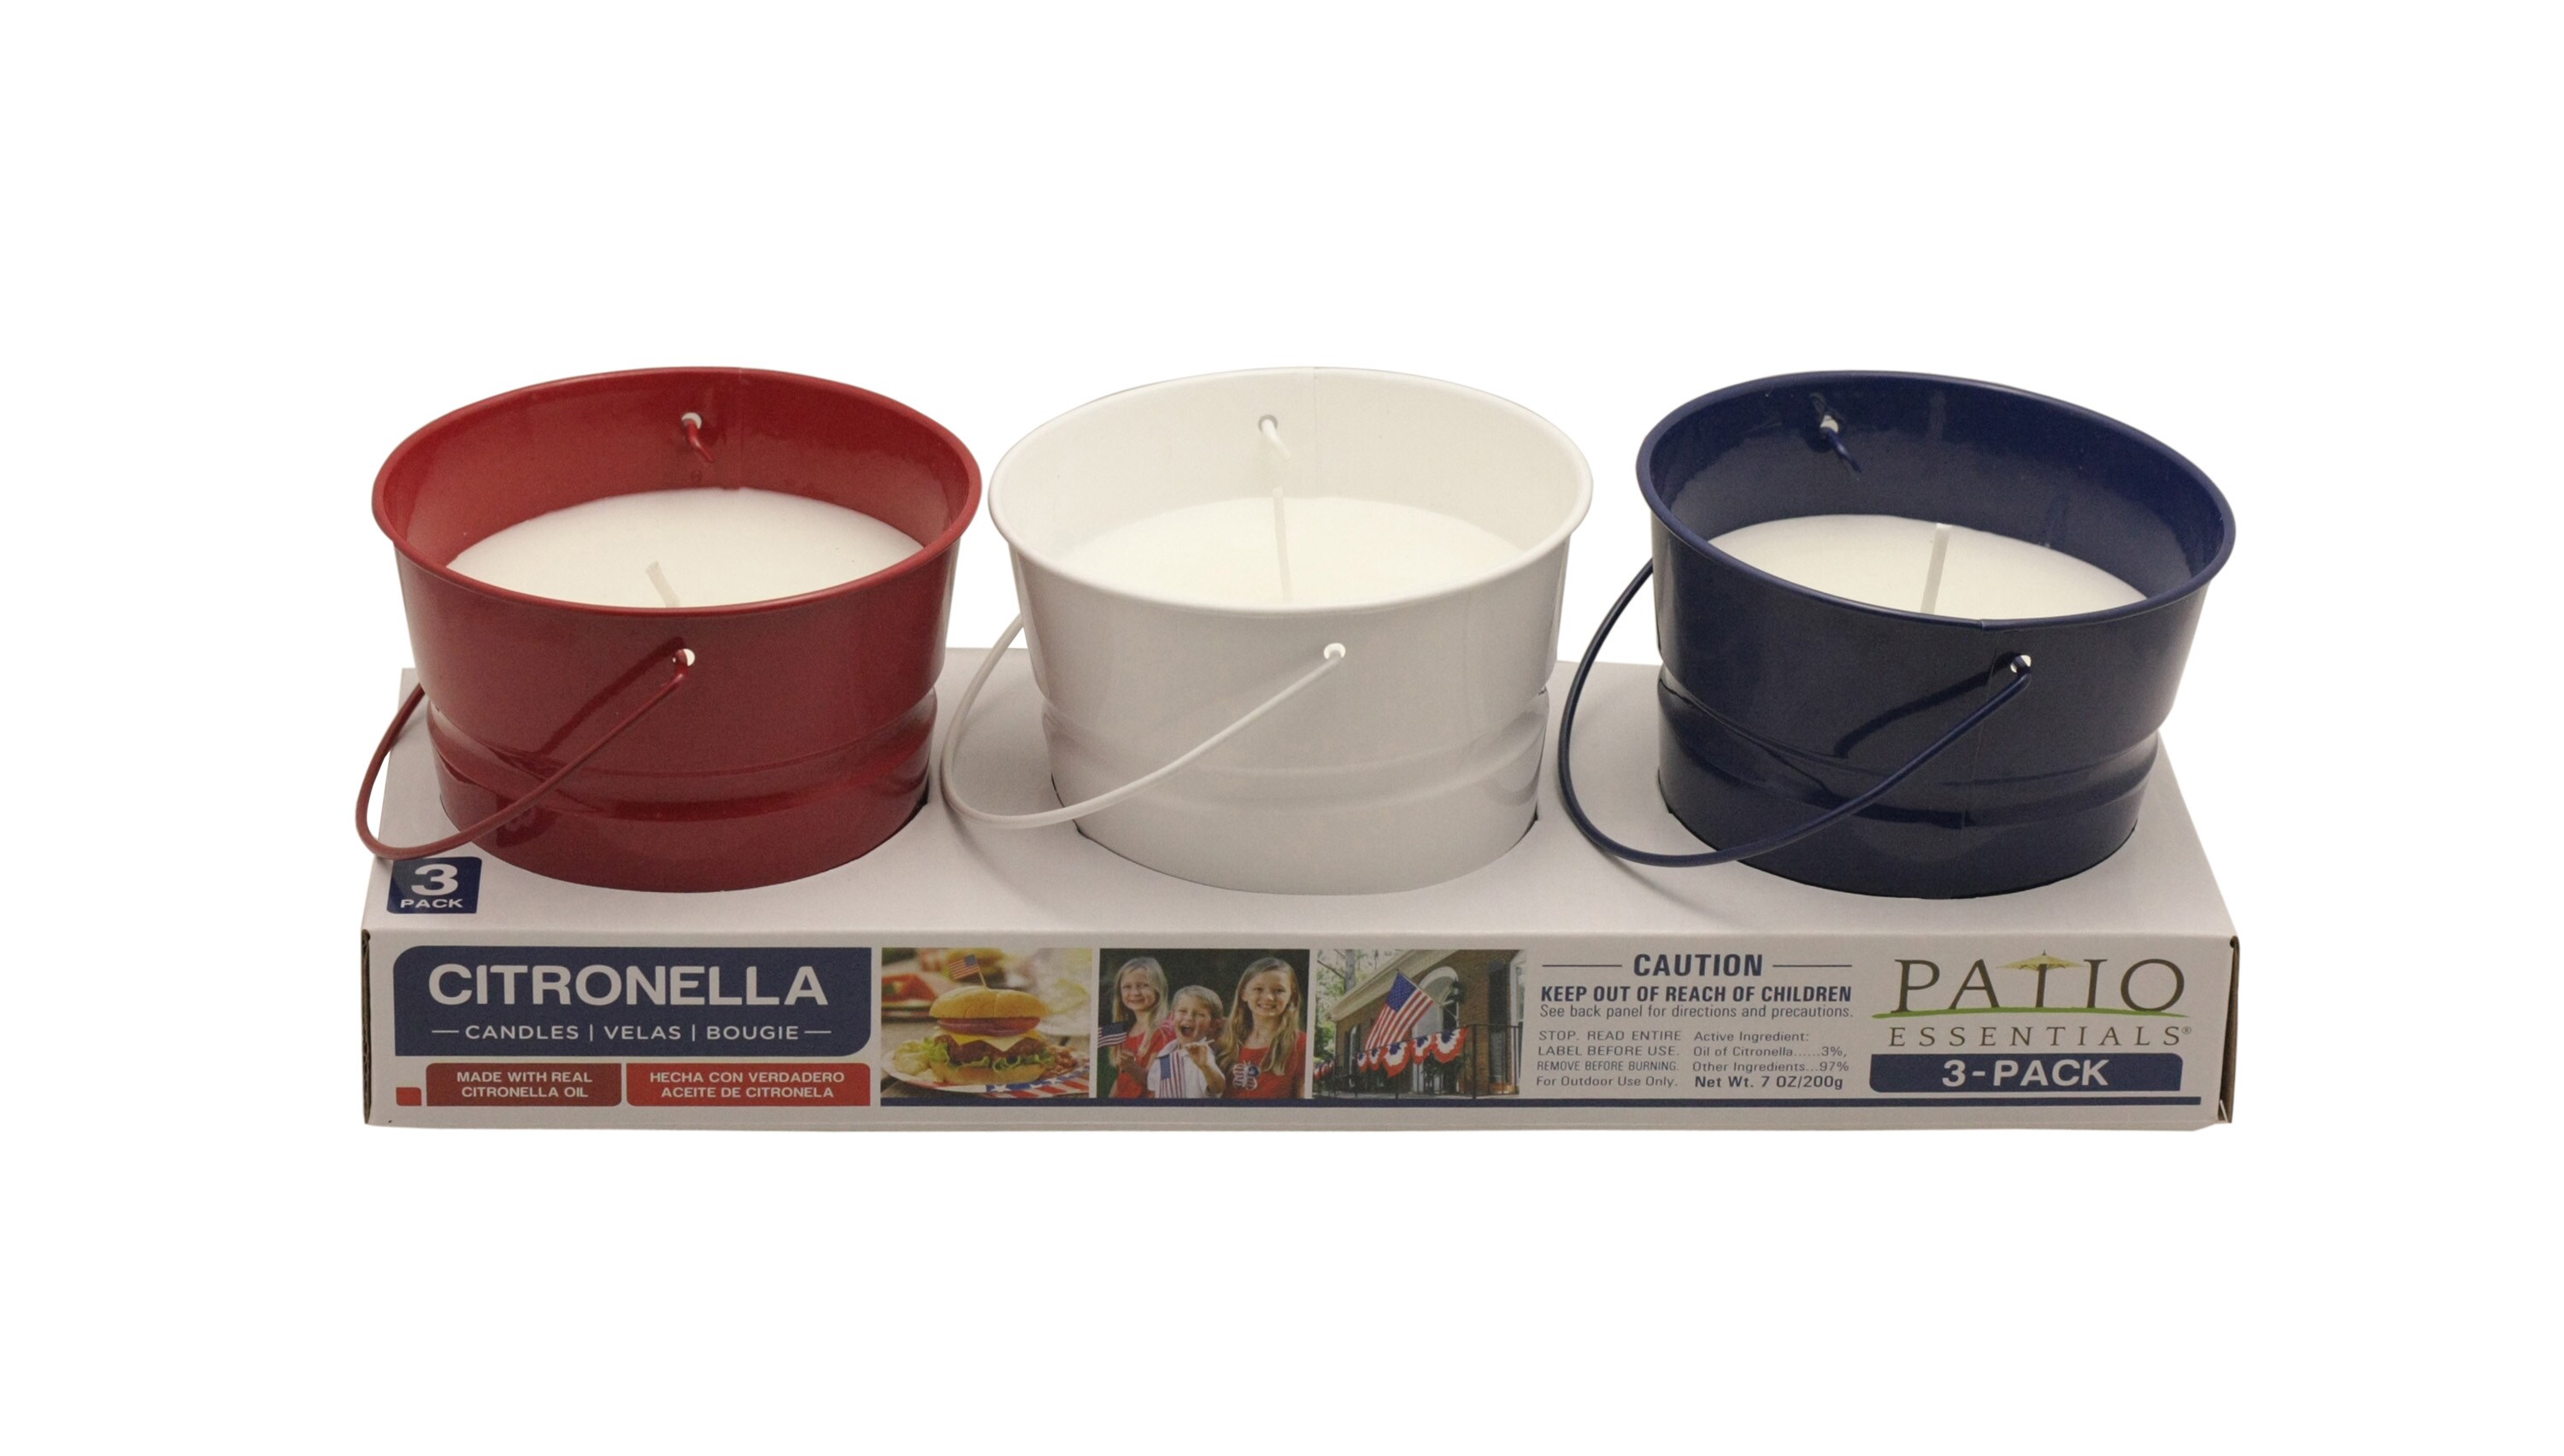 CITRONELLA PATIO GARDEN CANDLE BUCKETS SET OF 3 RED BLUE GREEN OUTDOOR LIGHT 